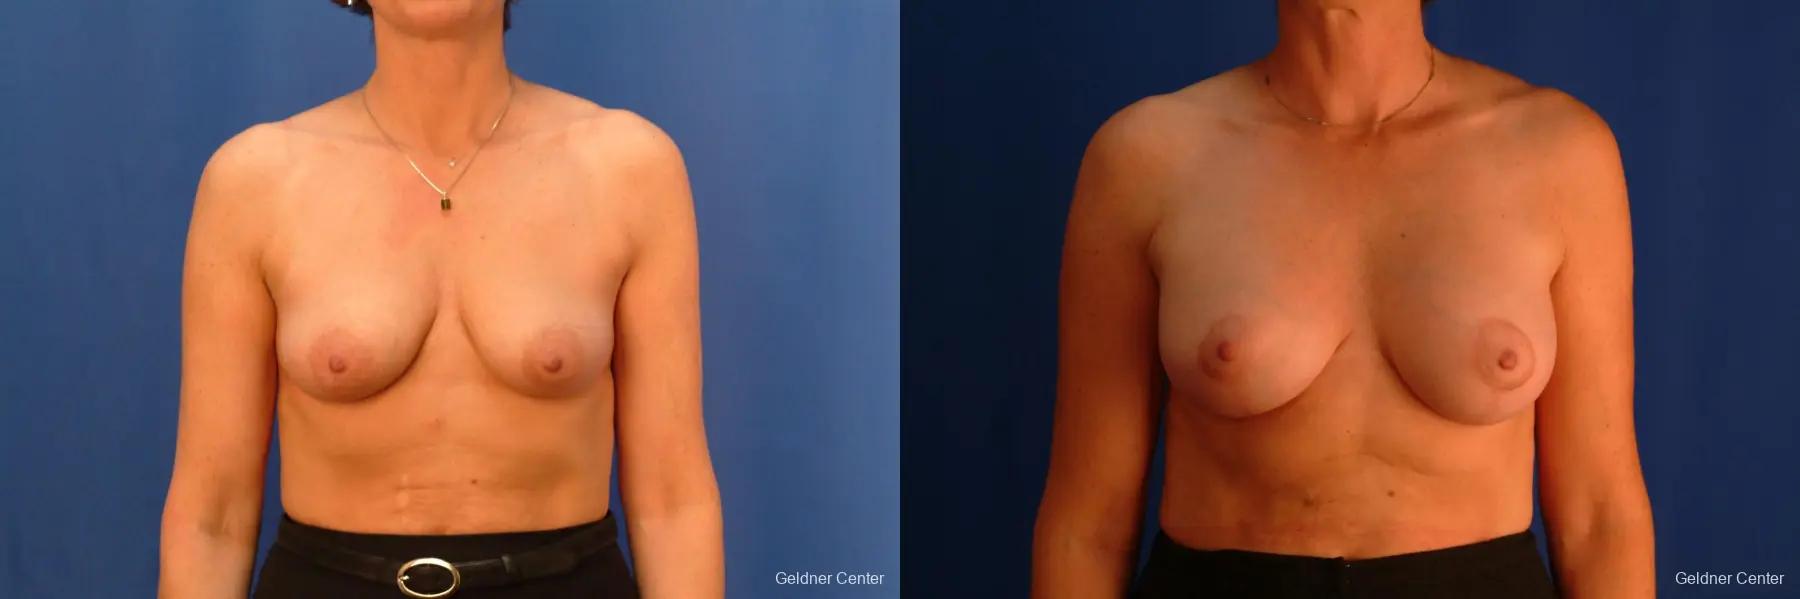 Breast Lift Hinsdale, Chicago 2509 - Before and After 1